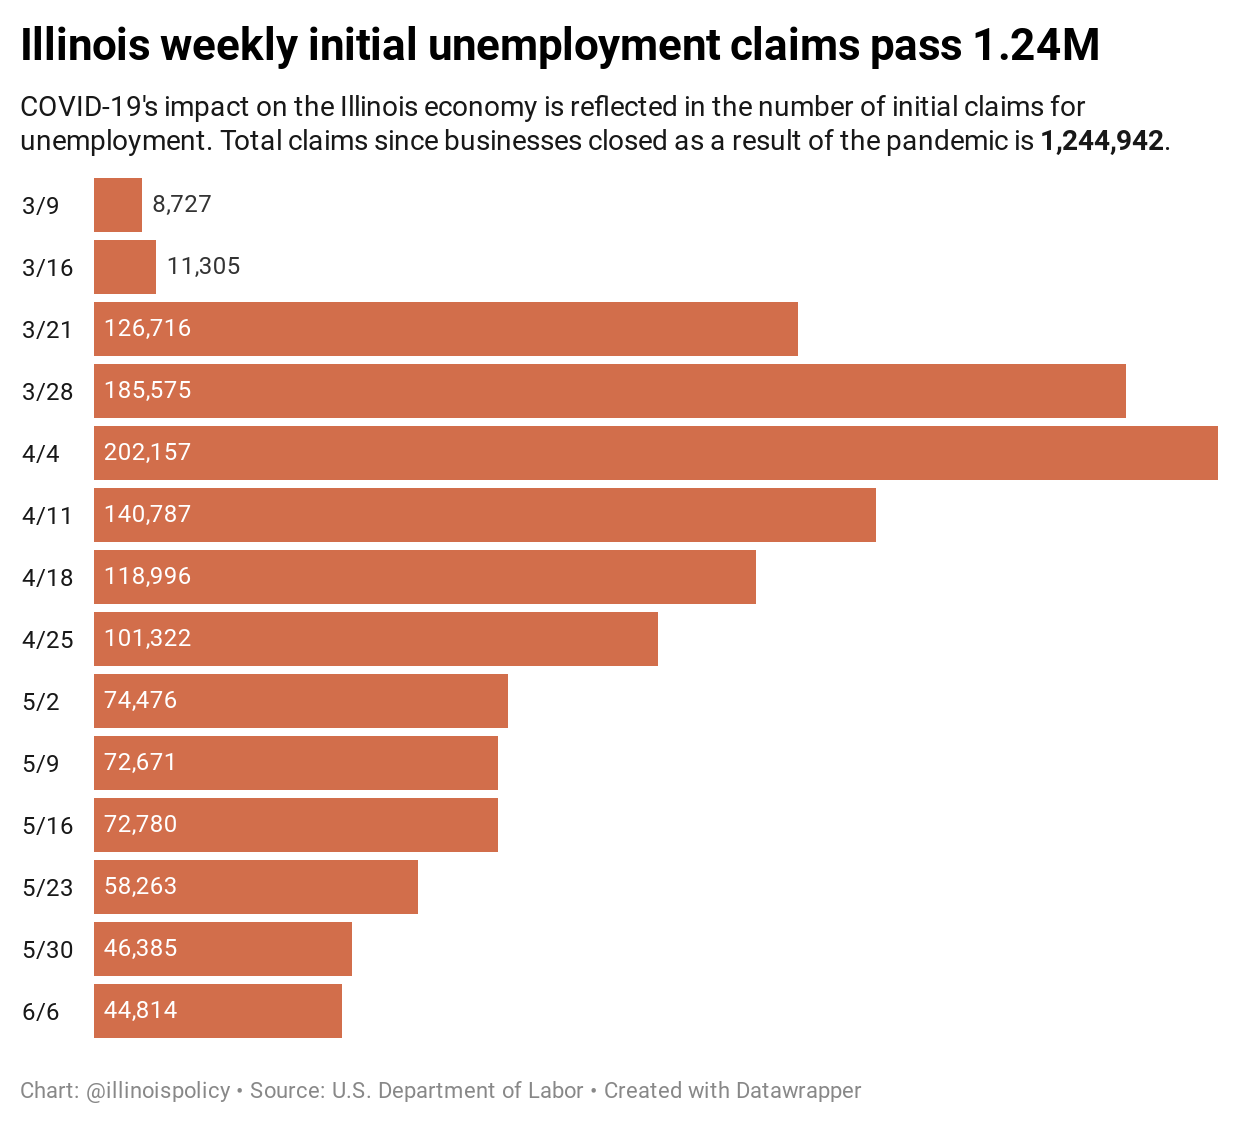 Illinois weekly initial unemployment claims pass 1.24M